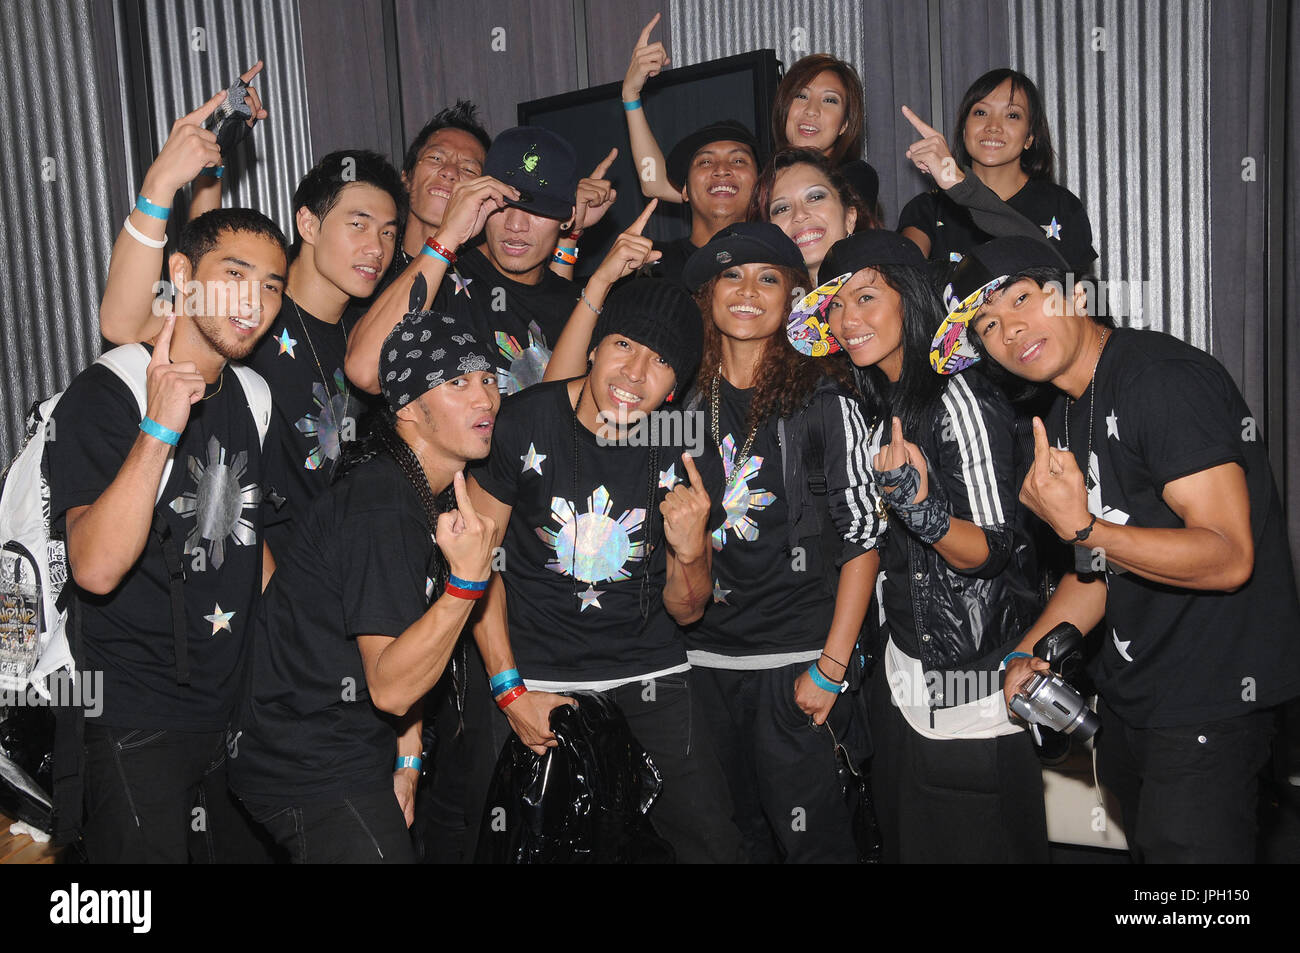 Philippine AllStars at the Live Taping of 'America's Best Dance Crew: Battle for the VMAs' - Backstage of Stage 23 at the Warner Bros. Studio in Burbank, CA. The event took place on Thursday, August 28, 2008. Photo by: Sthanlee B. Mirador Pacific Rim Photo Press. Stock Photo